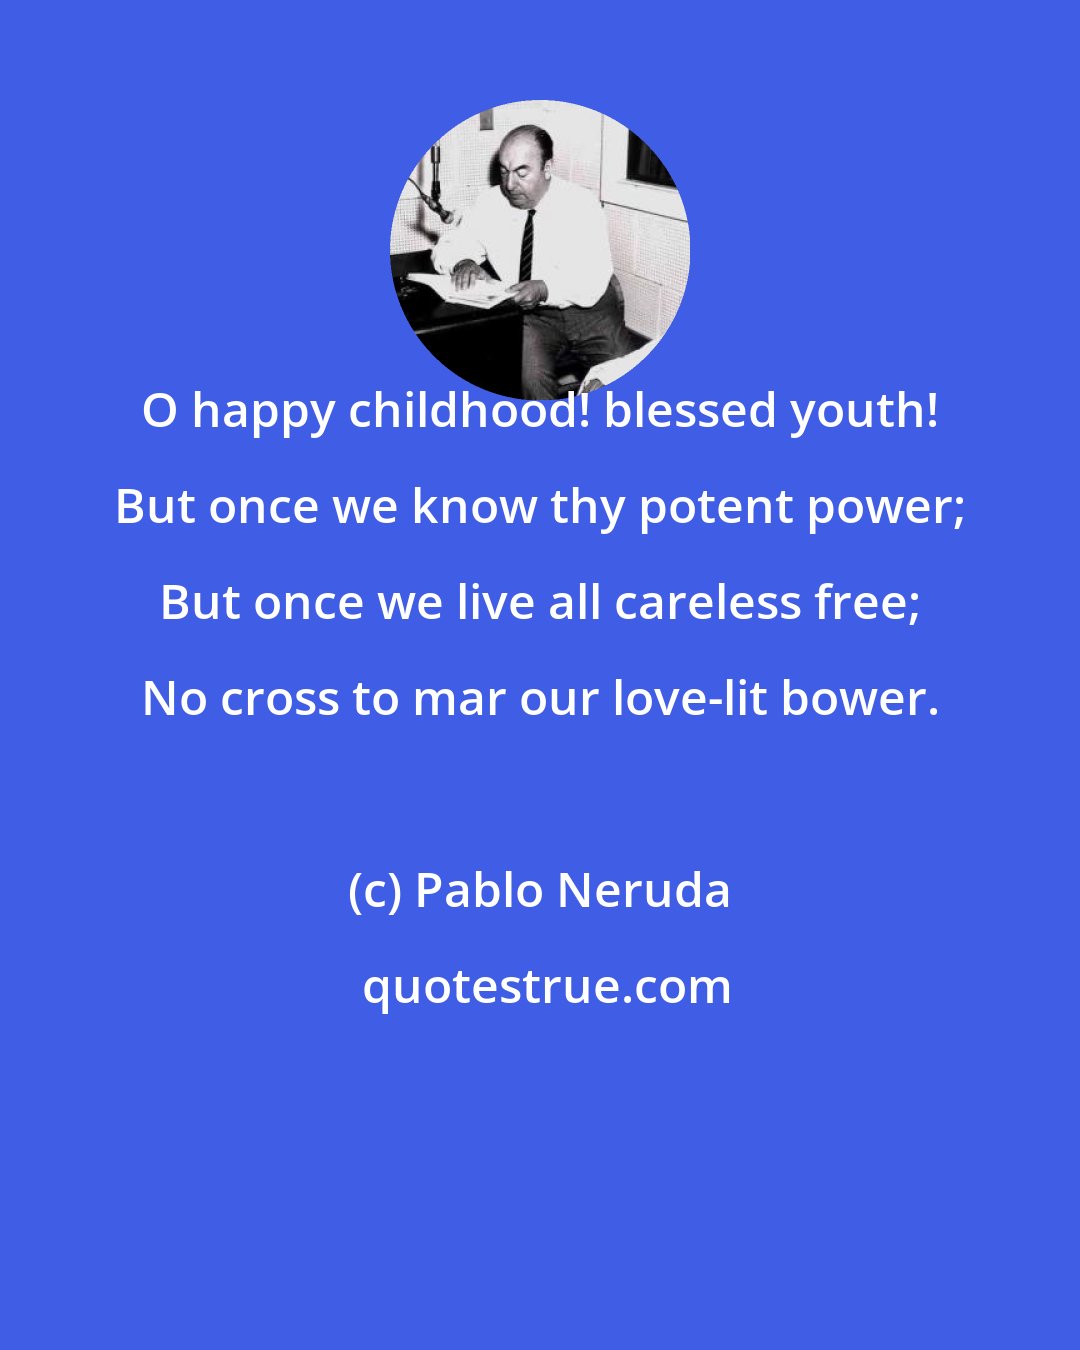 Pablo Neruda: O happy childhood! blessed youth! But once we know thy potent power; But once we live all careless free; No cross to mar our love-lit bower.